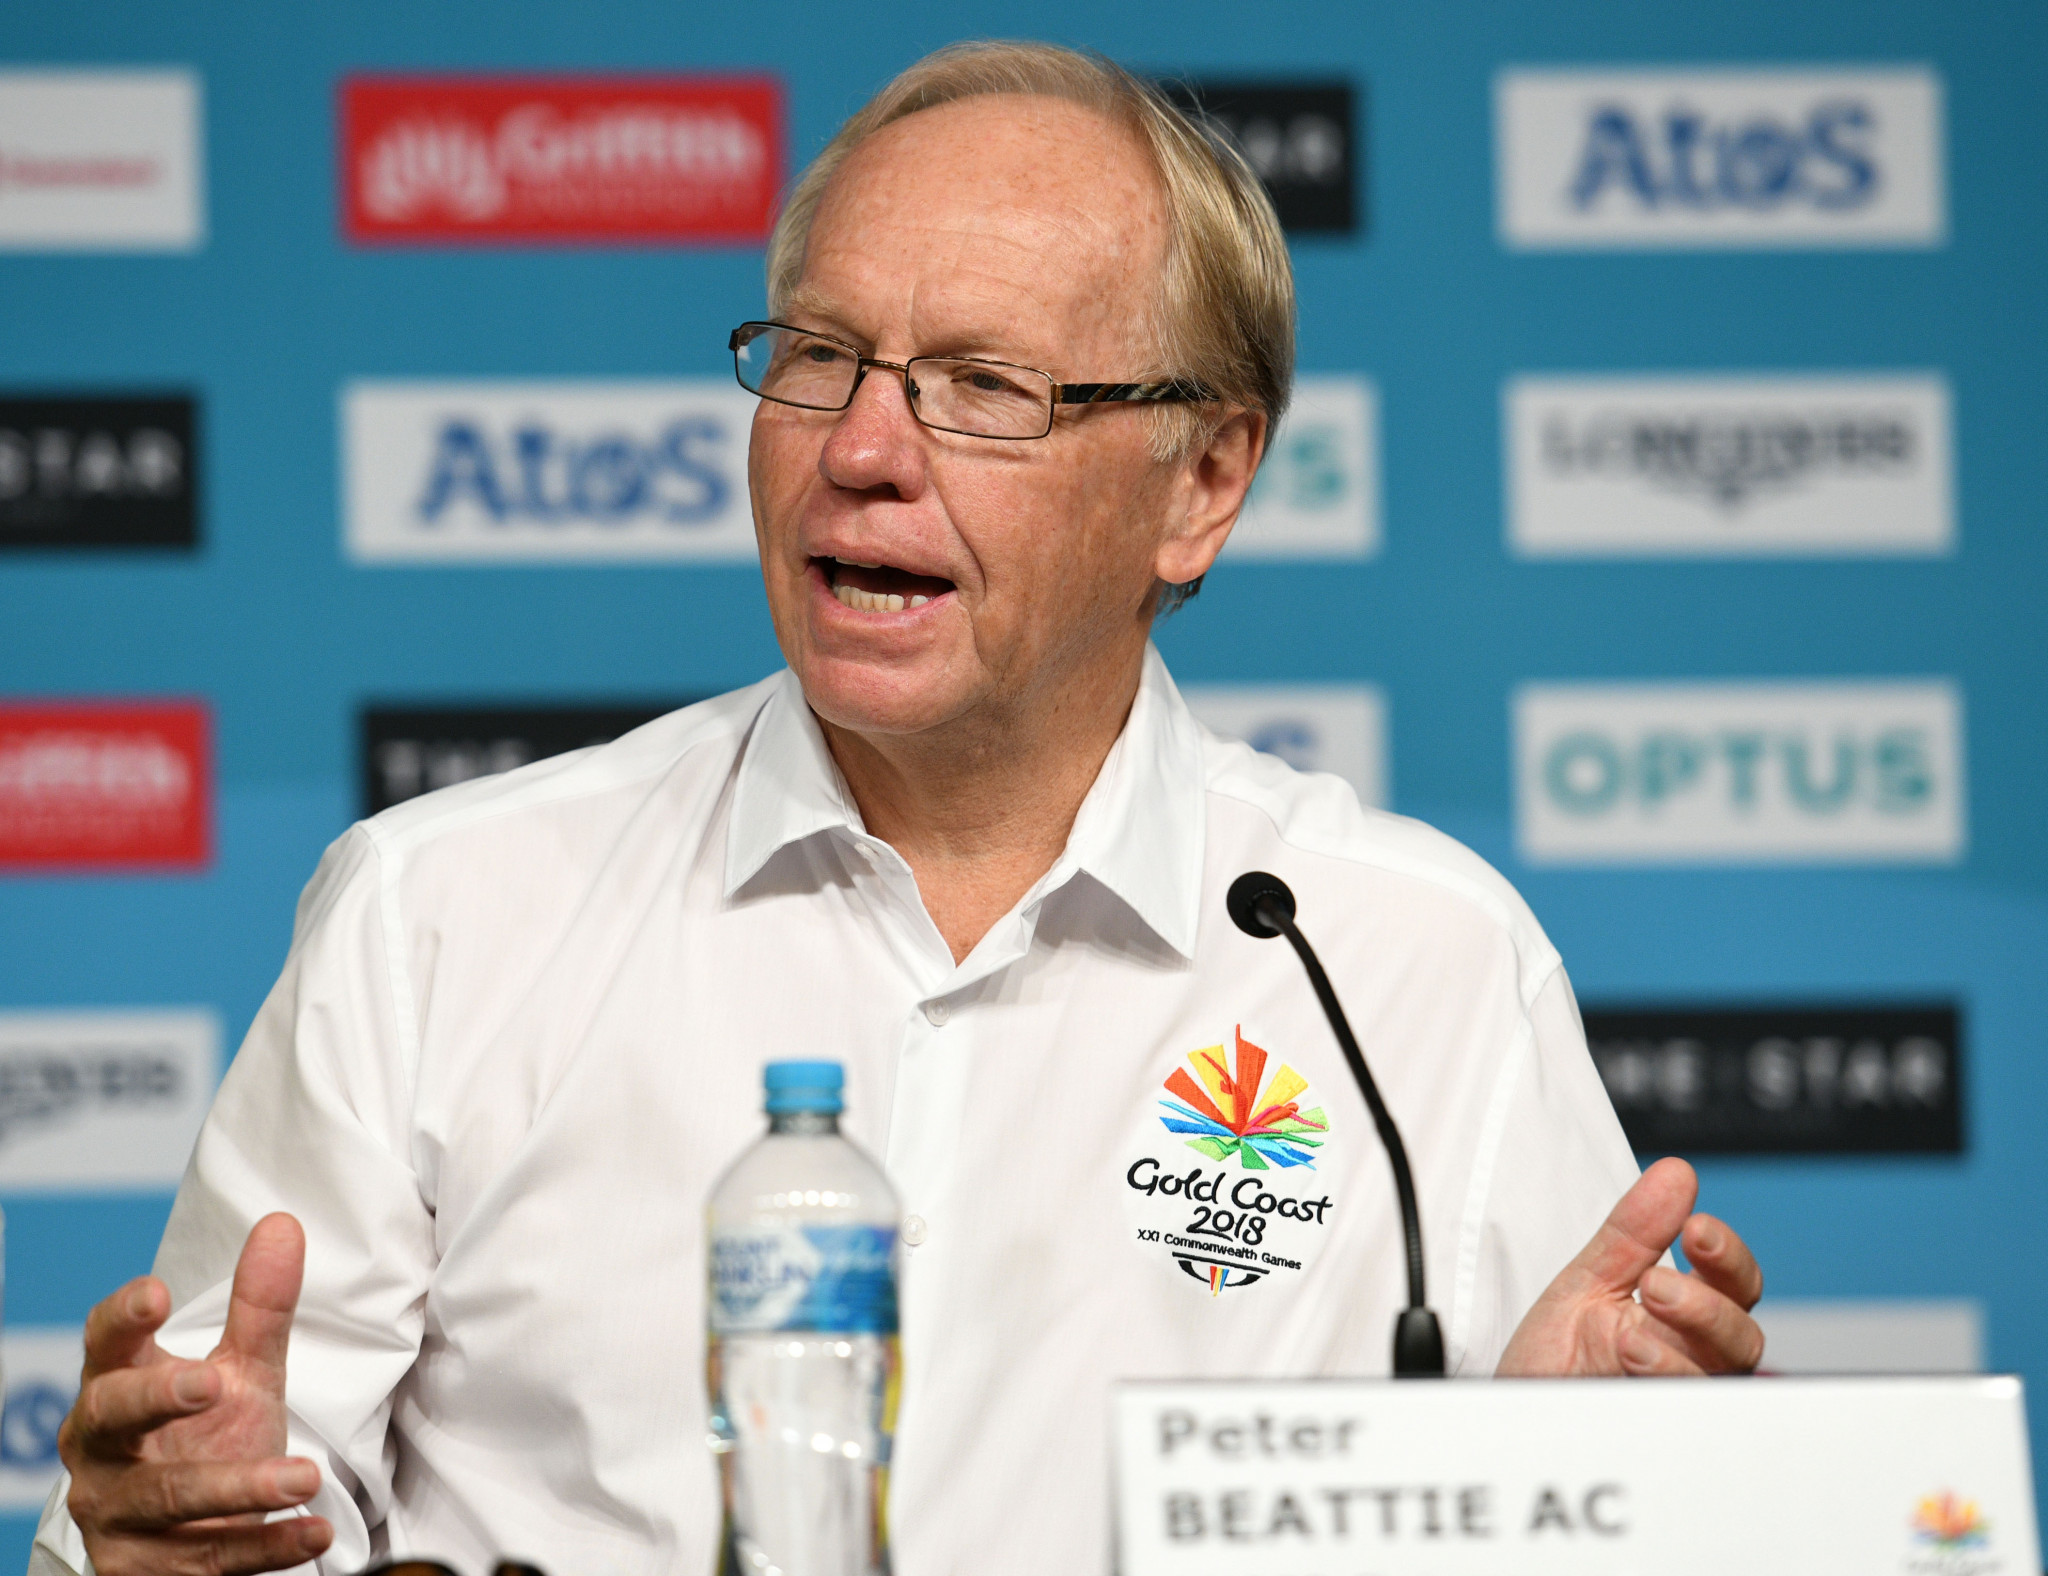 Peter Beattie, chairman of GOLDOC, announced the sum after the final Gold Coast 2018 board meeting ©Getty Images